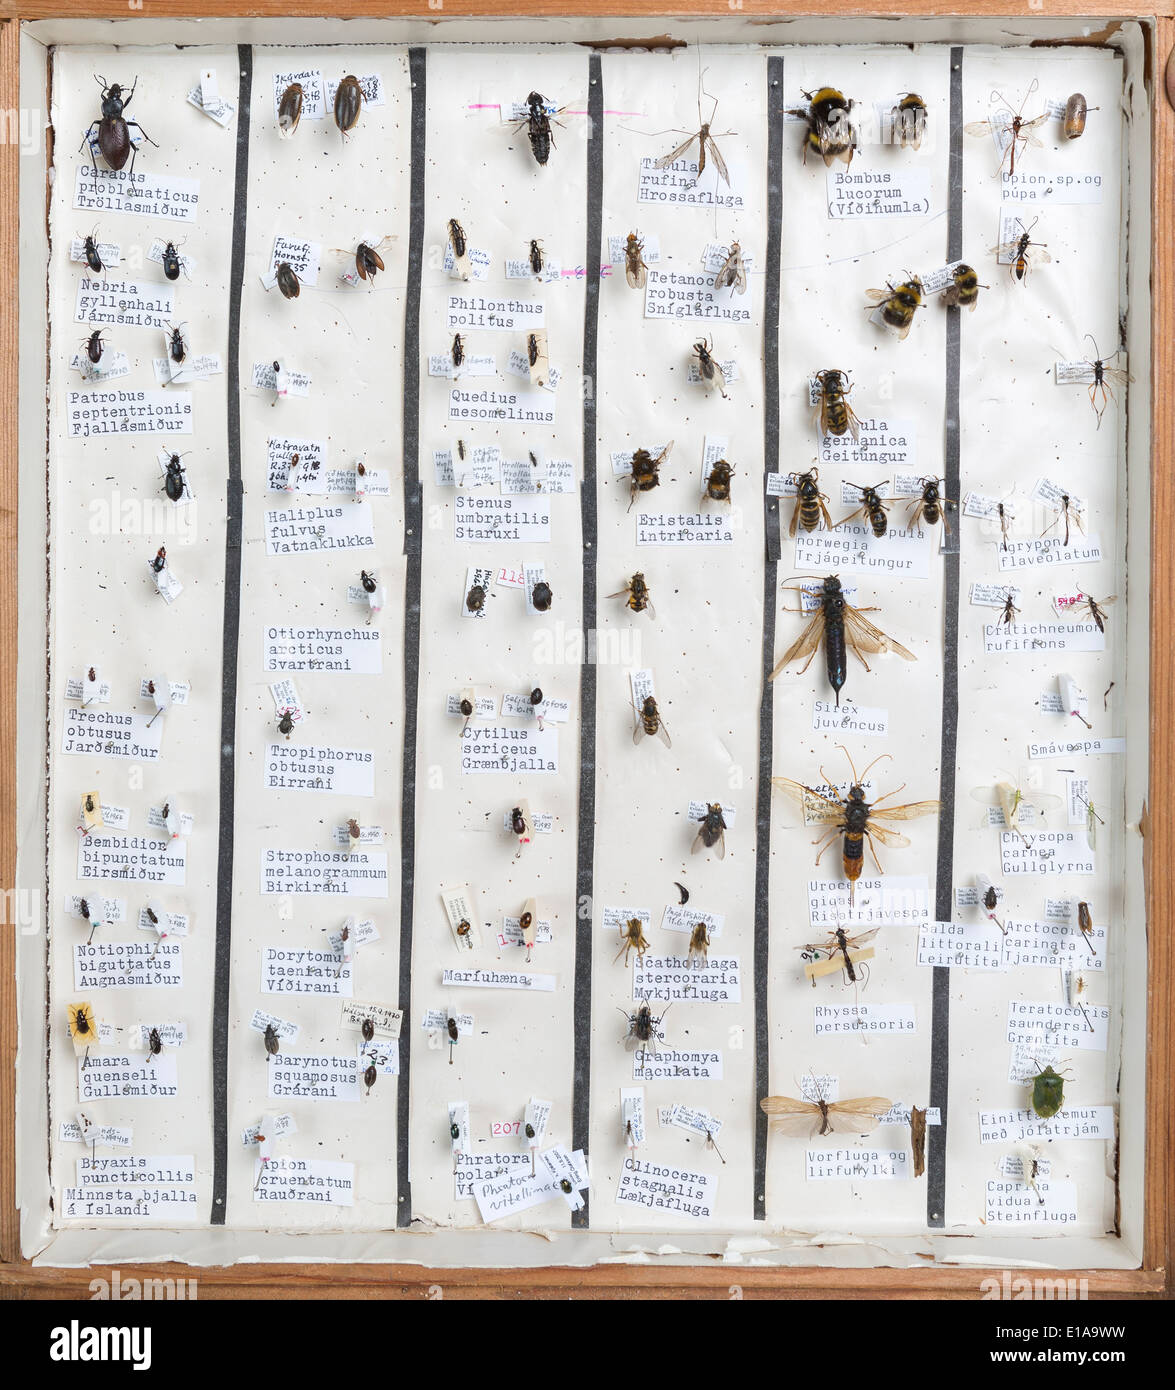 Framed insect collection, Reykjavik, Iceland Stock Photo